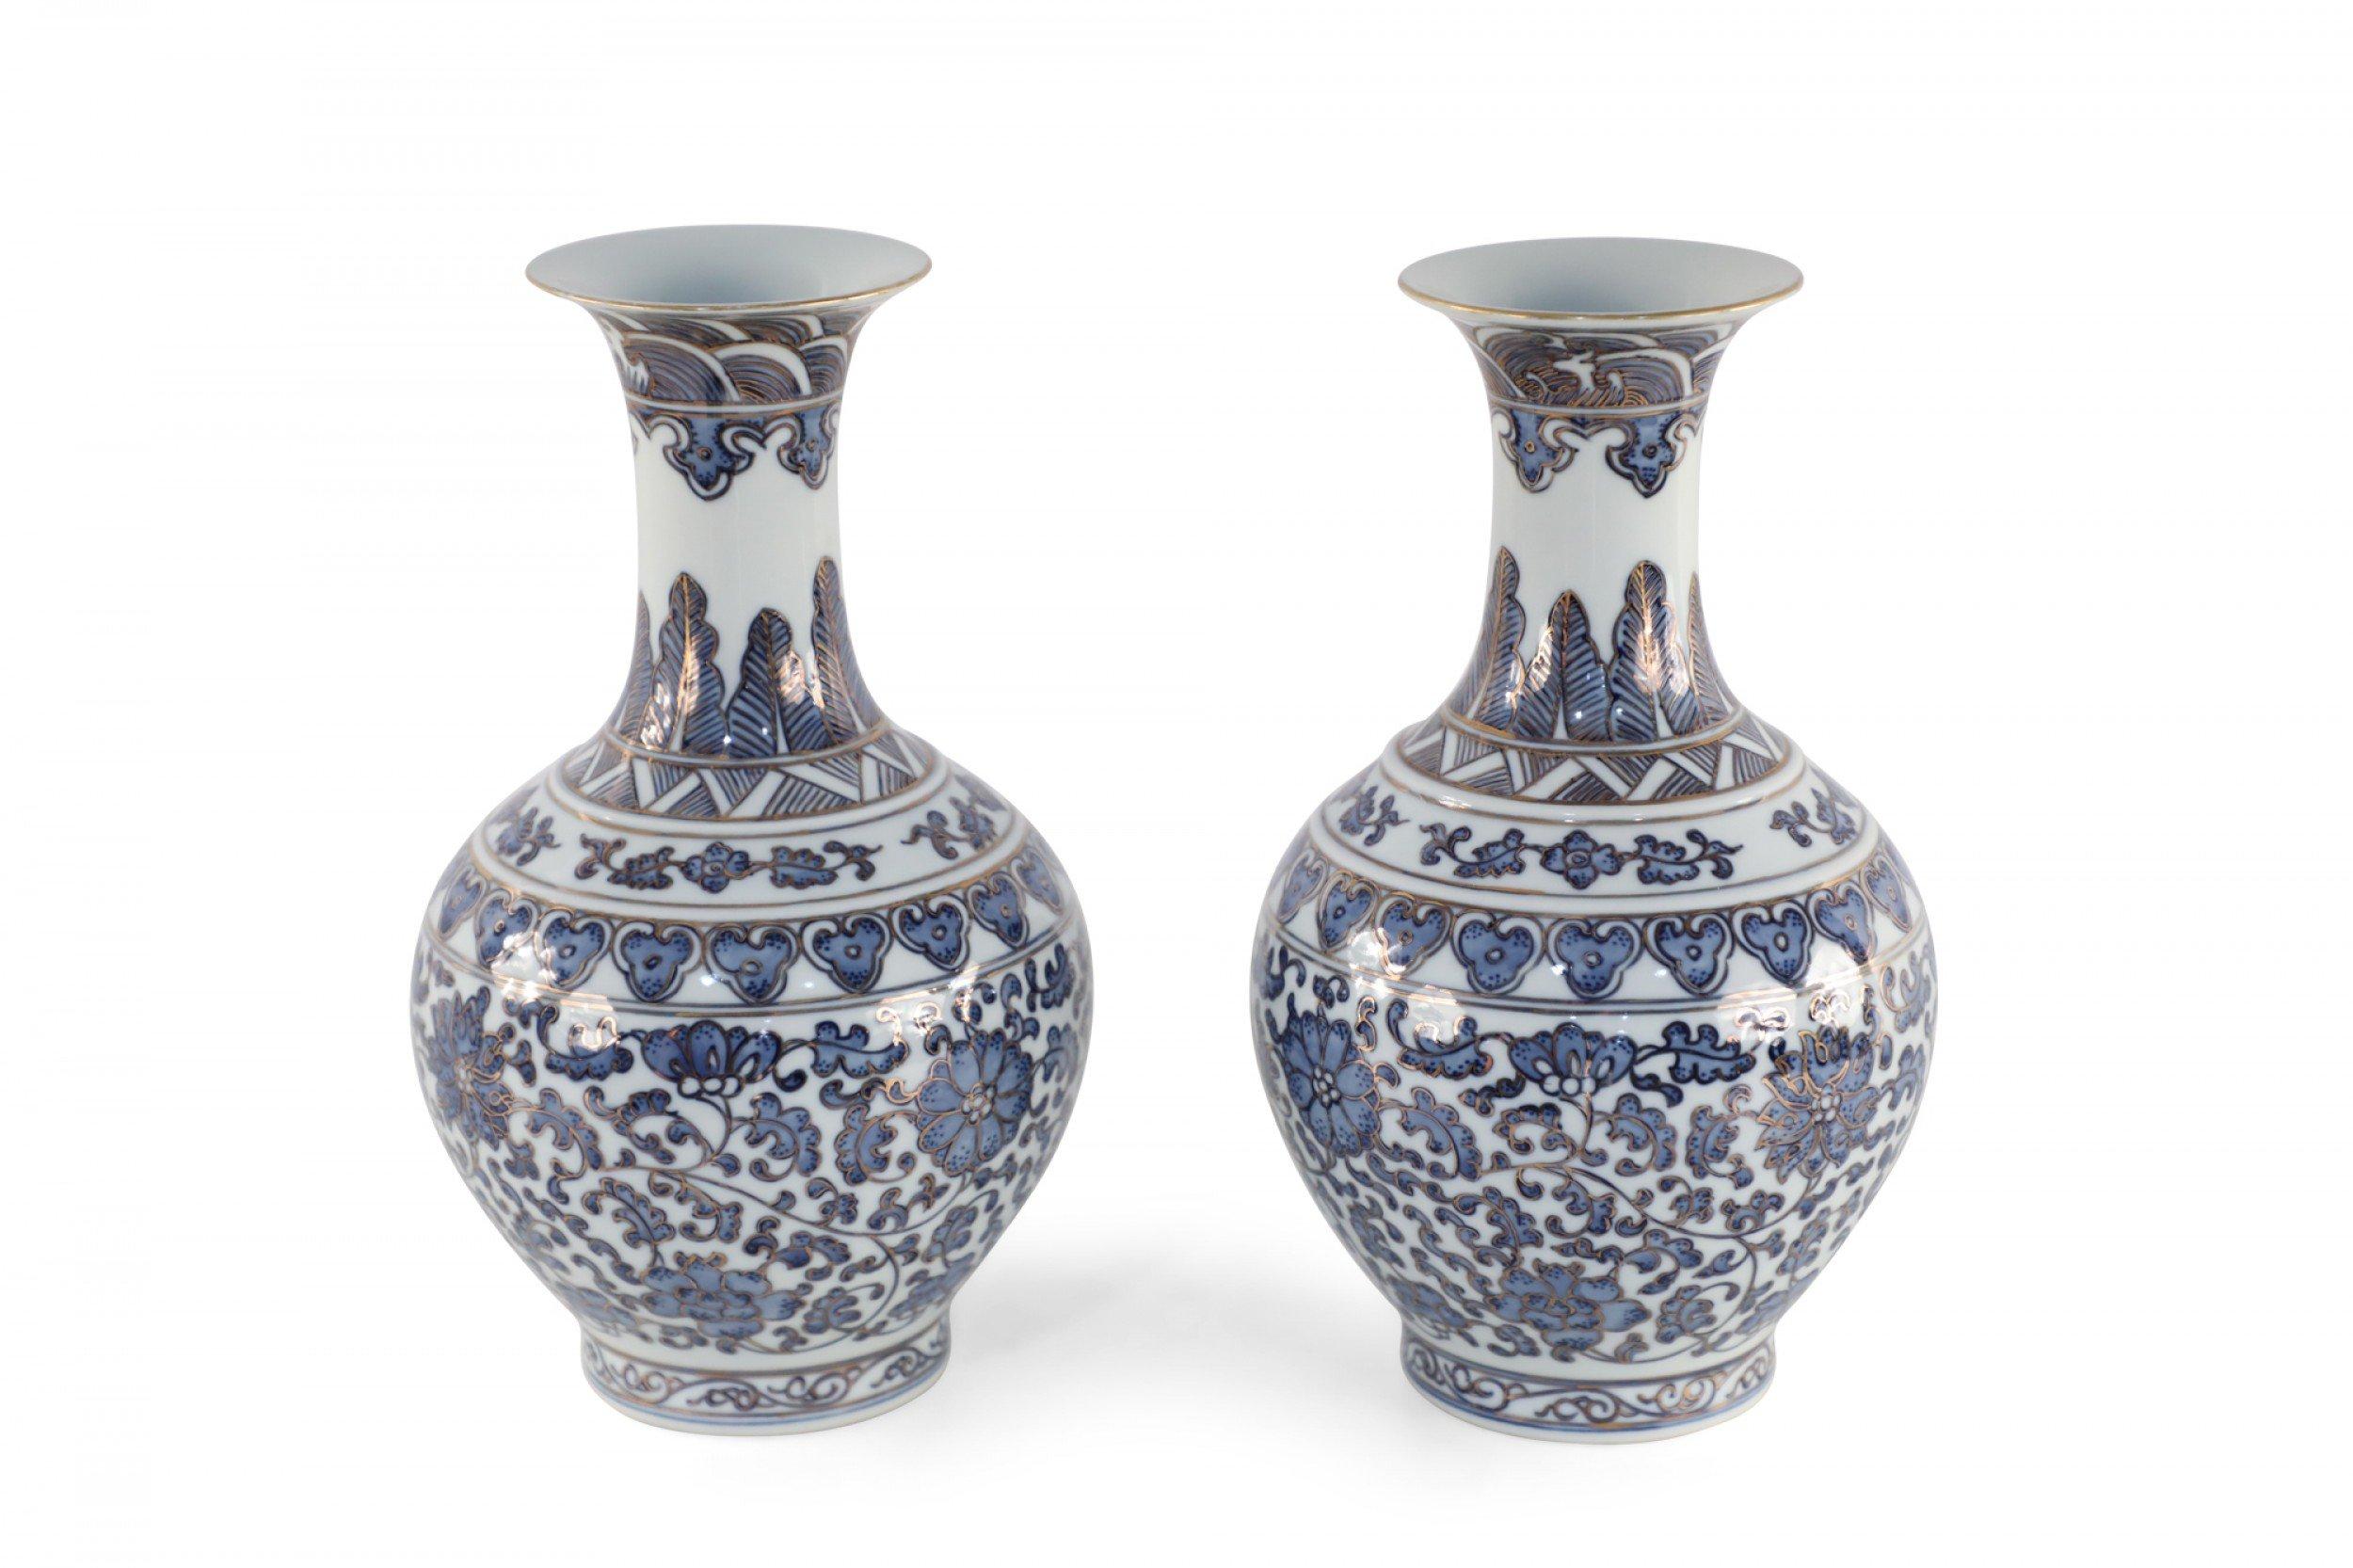 Chinese Export Pair of Chinese Qing Dynasty Blue and White Gold-Lined Porcelain Vases